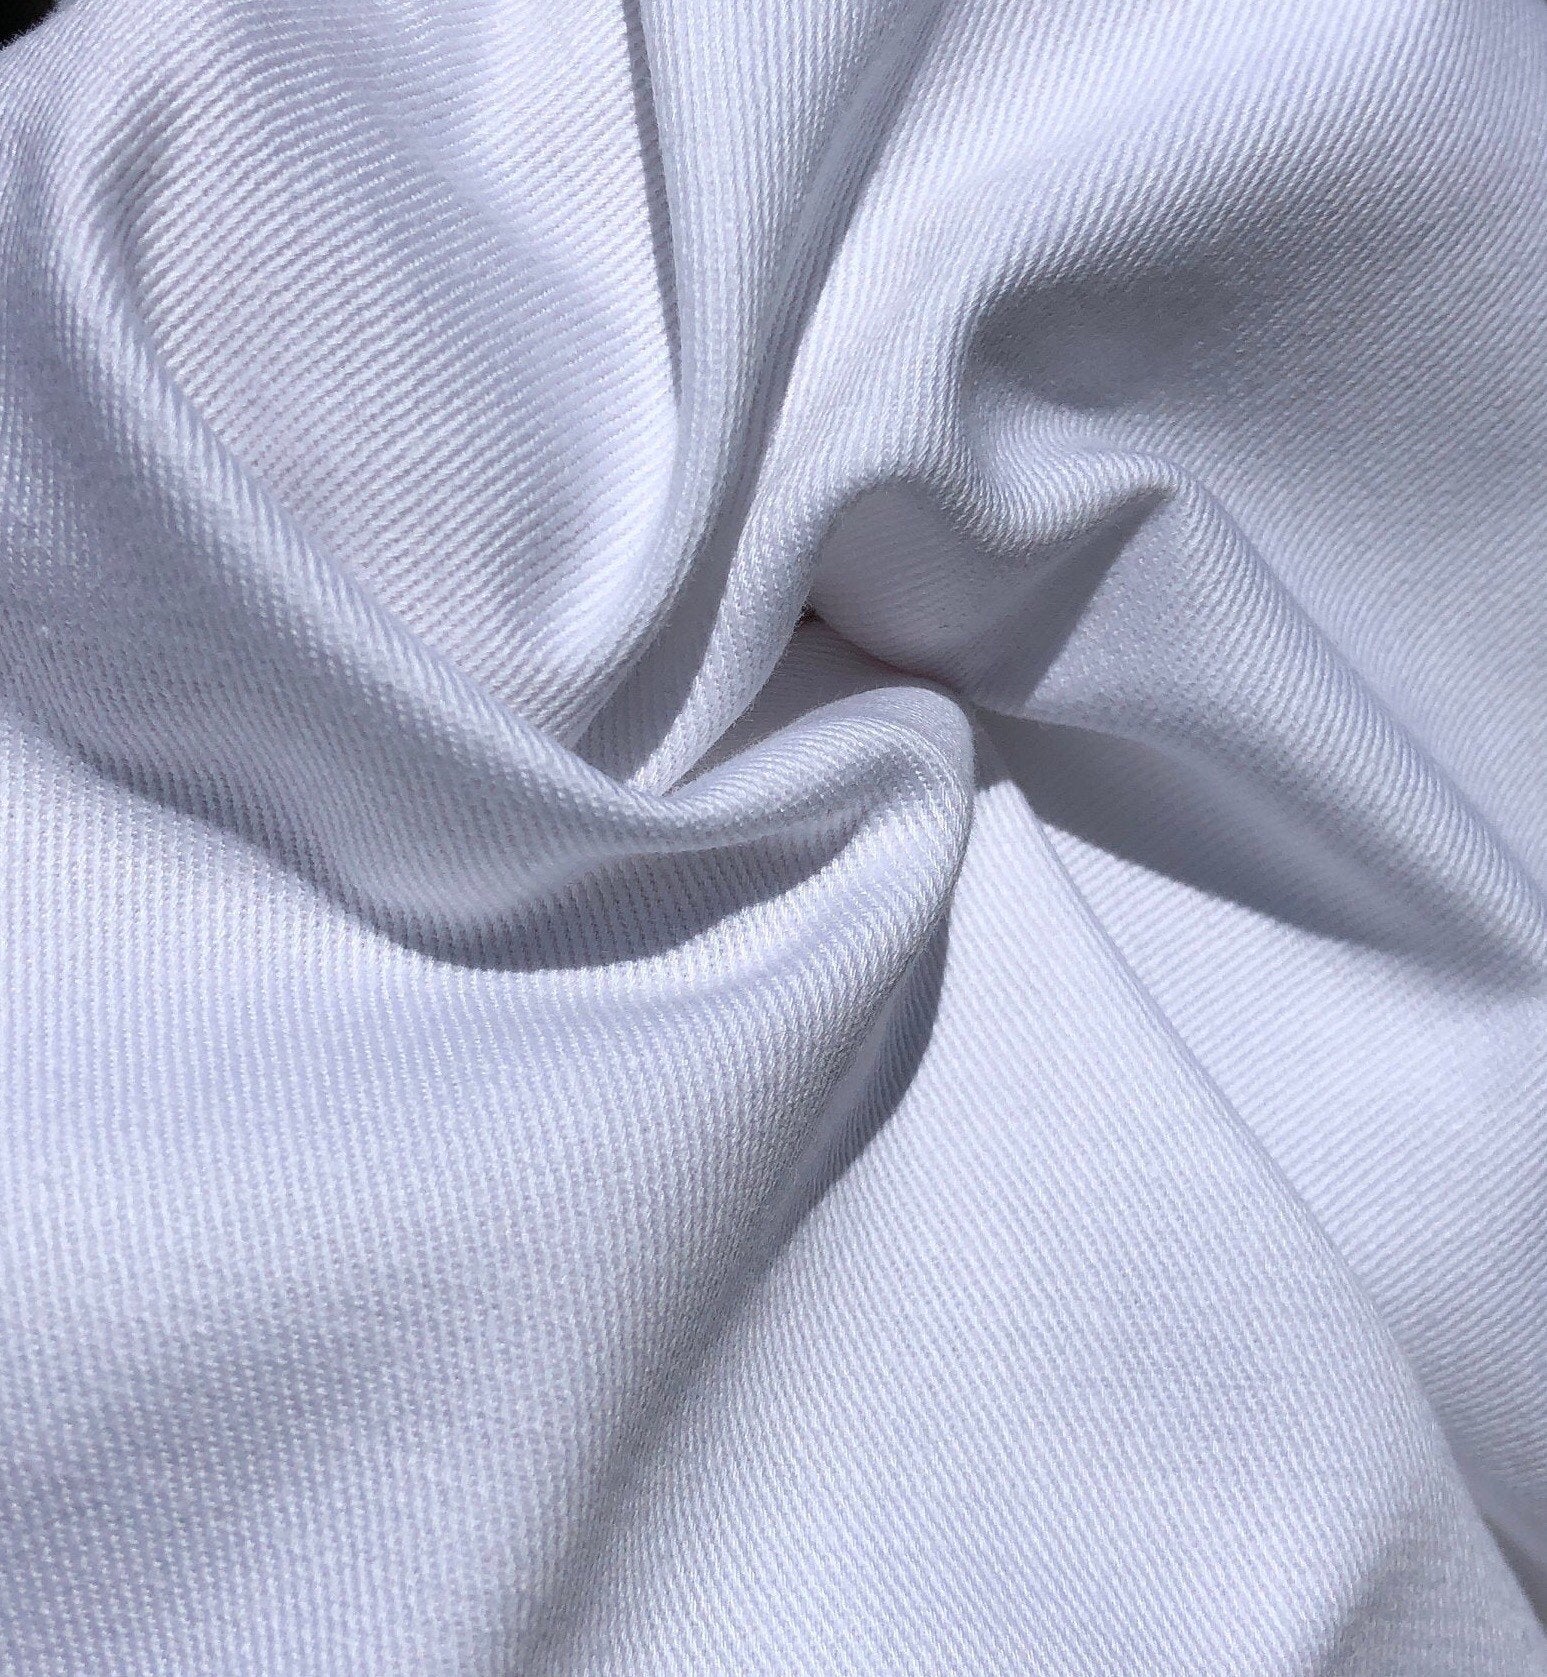 60 100% Cotton Twill 7 OZ Optic White Apparel Woven Fabric By the Yard